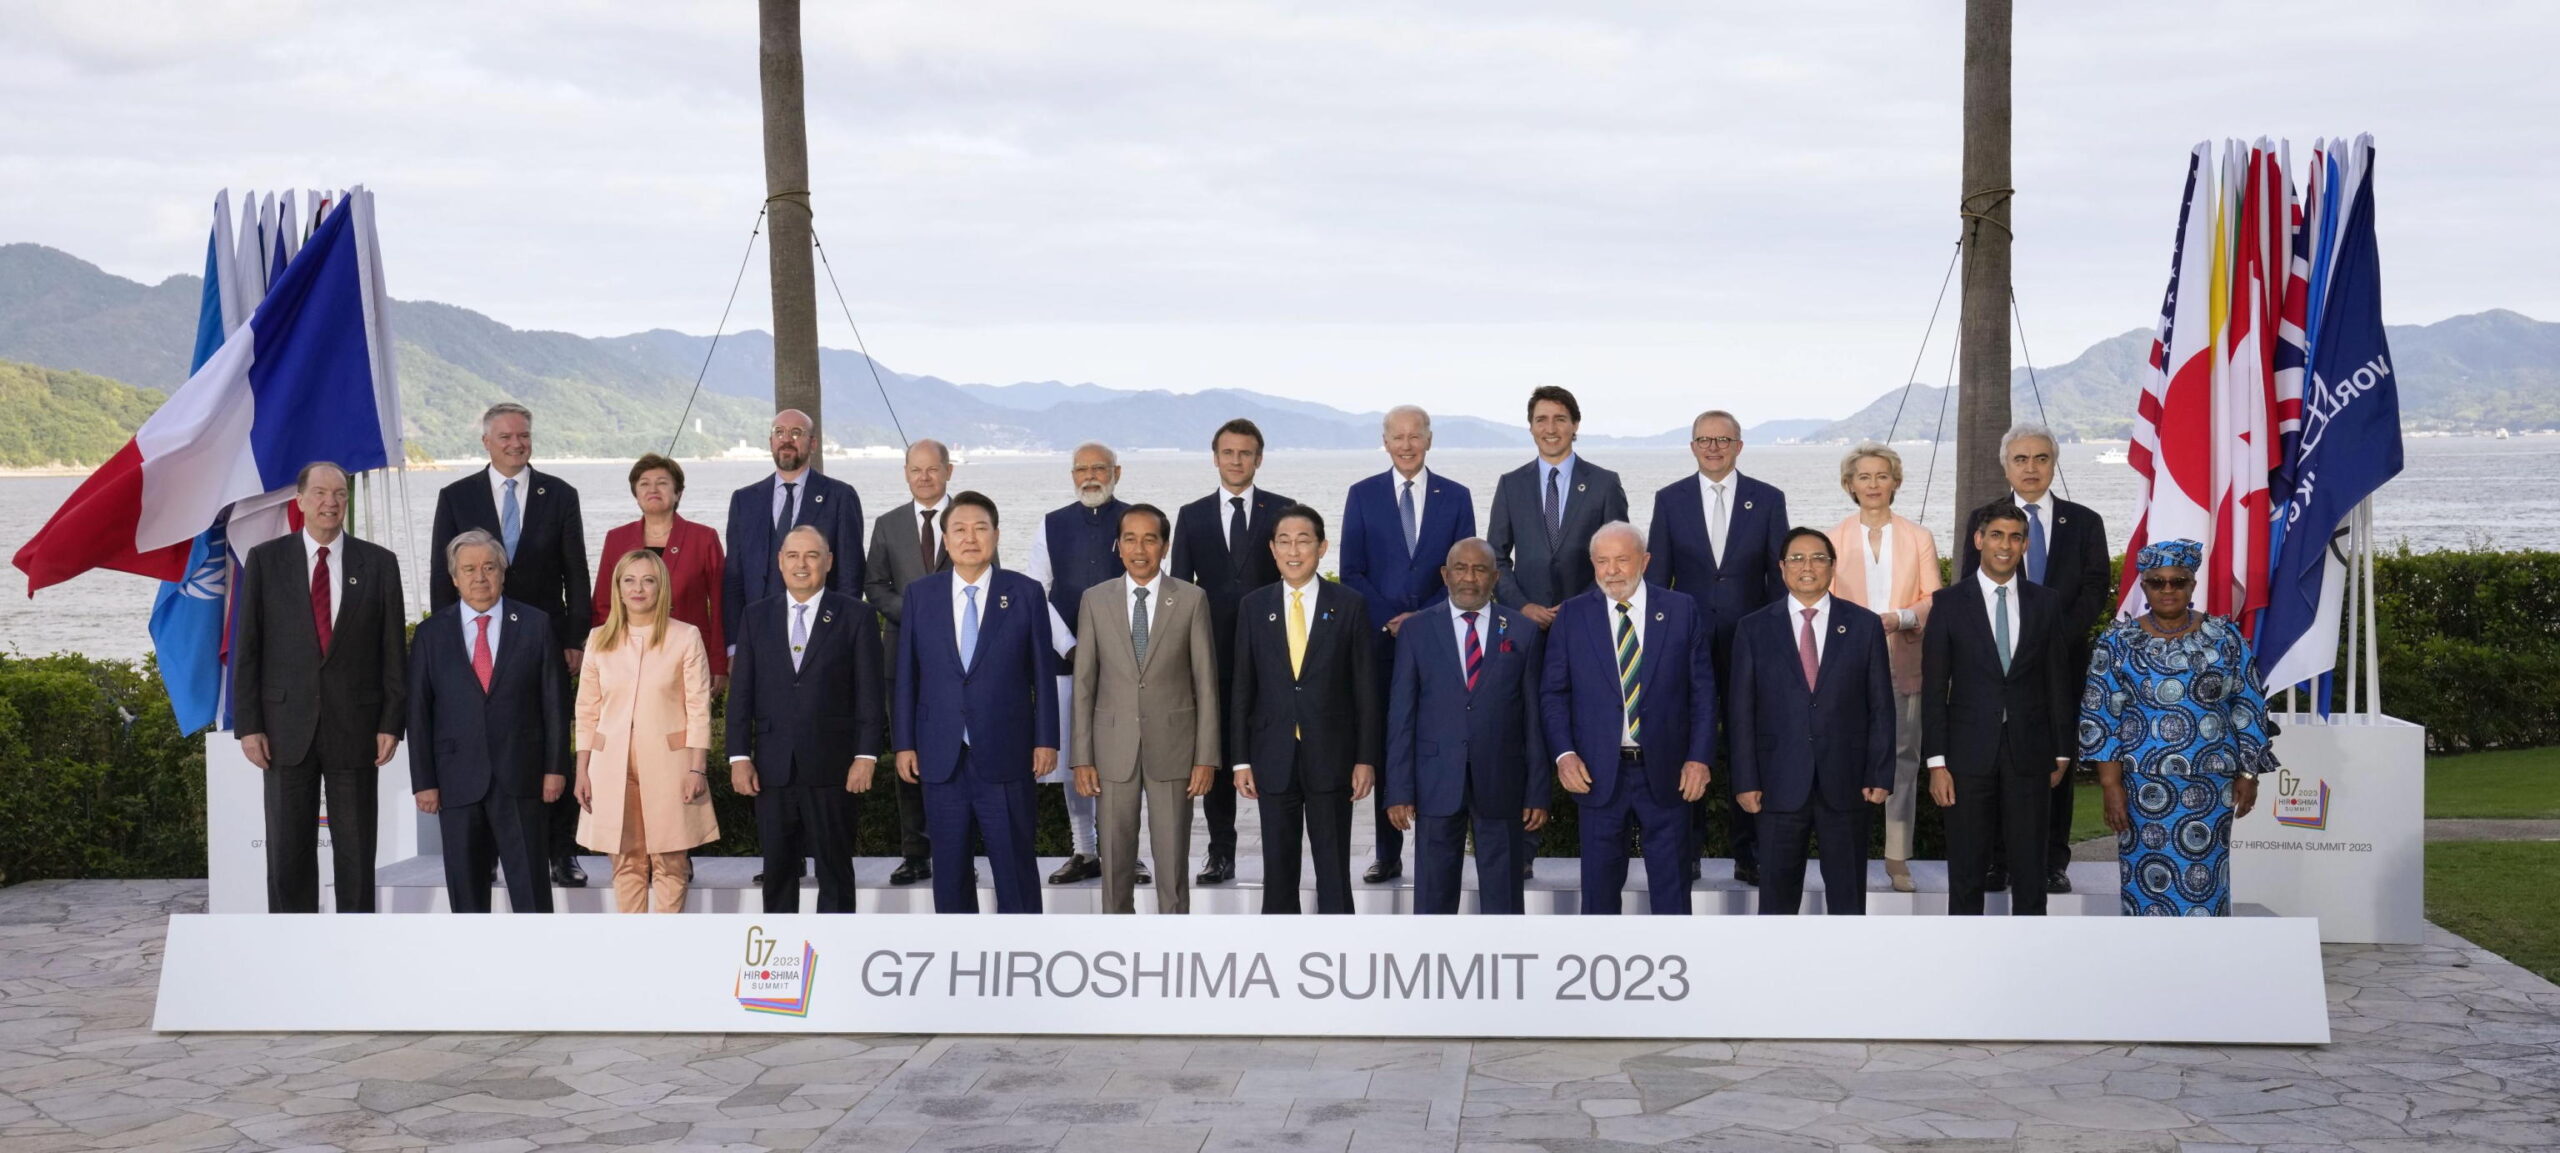 epa10640289 Leaders and delegates pose for a group photo at the Grand Prince Hotel Hiroshima during the G7 Hiroshima Summit in Hiroshima, Japan, 20 May 2023. The G7 Hiroshima Summit began 19 May and will conclude 21 May.  EPA/JAPAN POOL JAPAN OUT, EDITORIAL USE ONLY, NO SALES